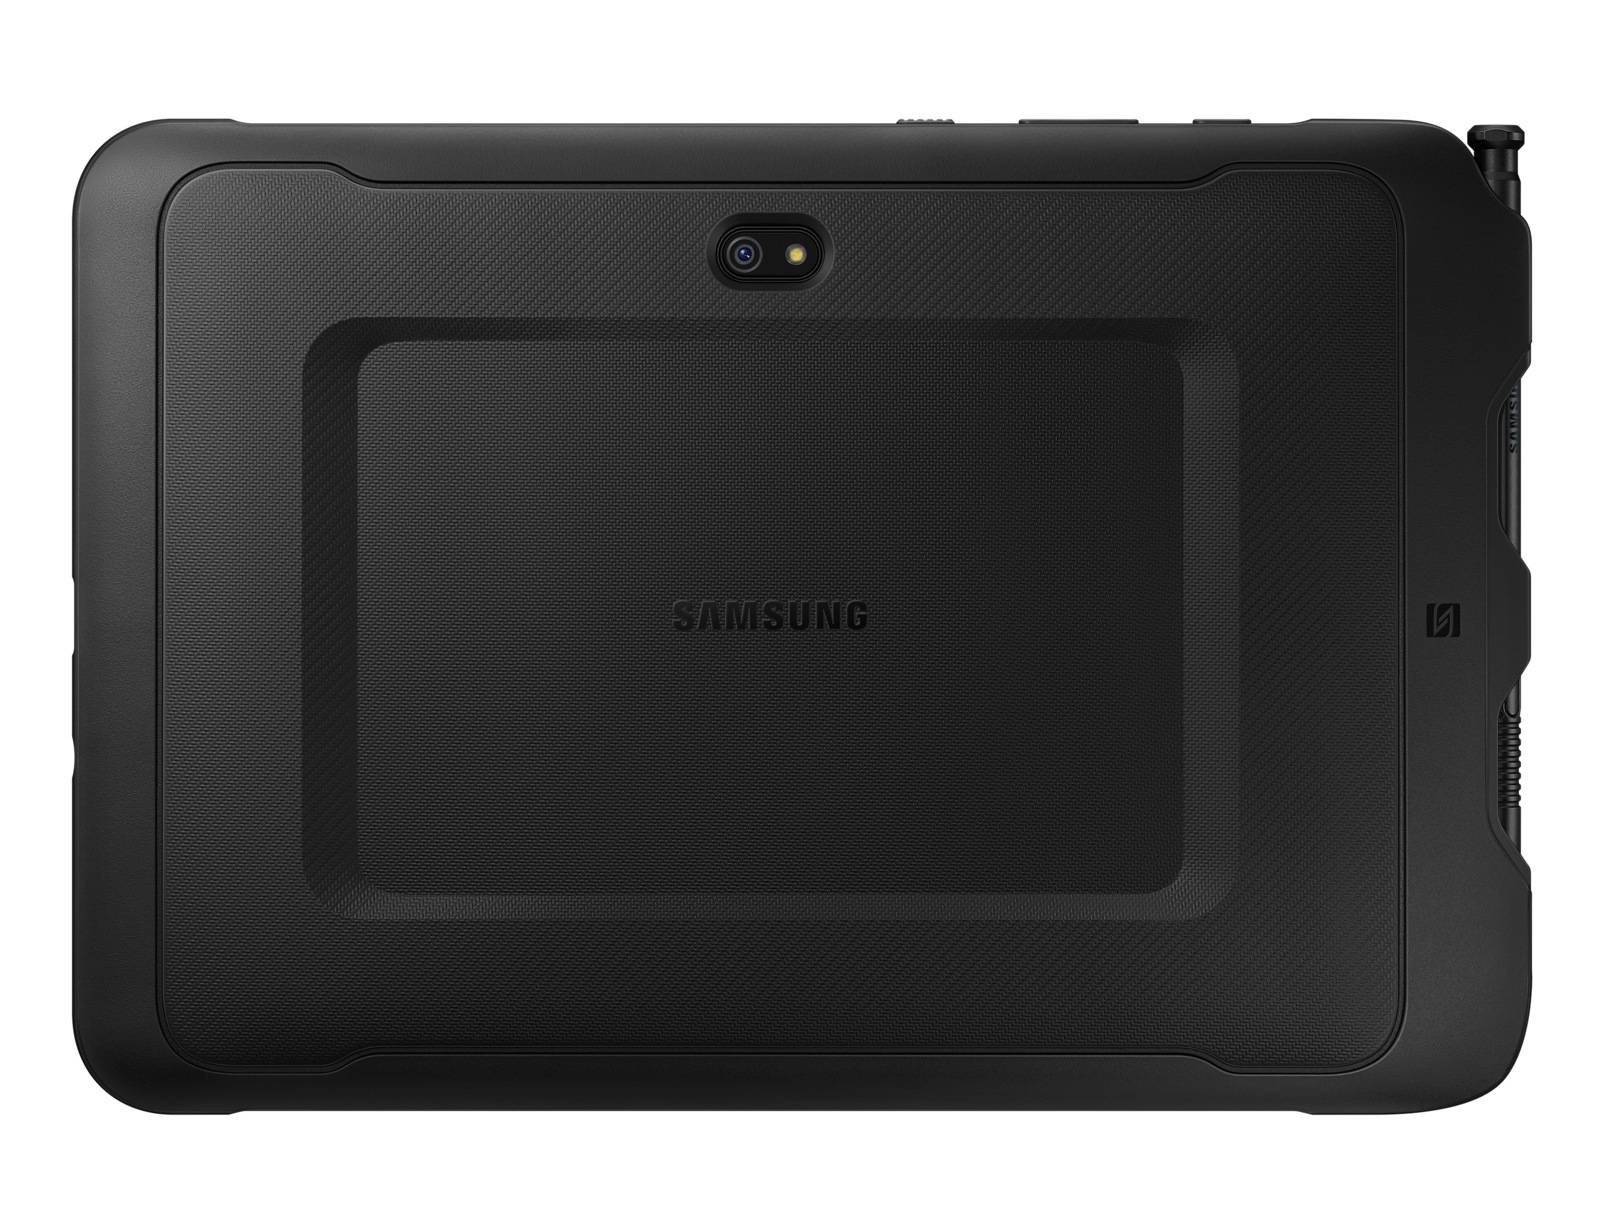 Rca Informatique - image du produit : GALAXYTAB A PRO SNAPDRAGON 670 64GB 4GB 10IN ANDROID 9.0        IN